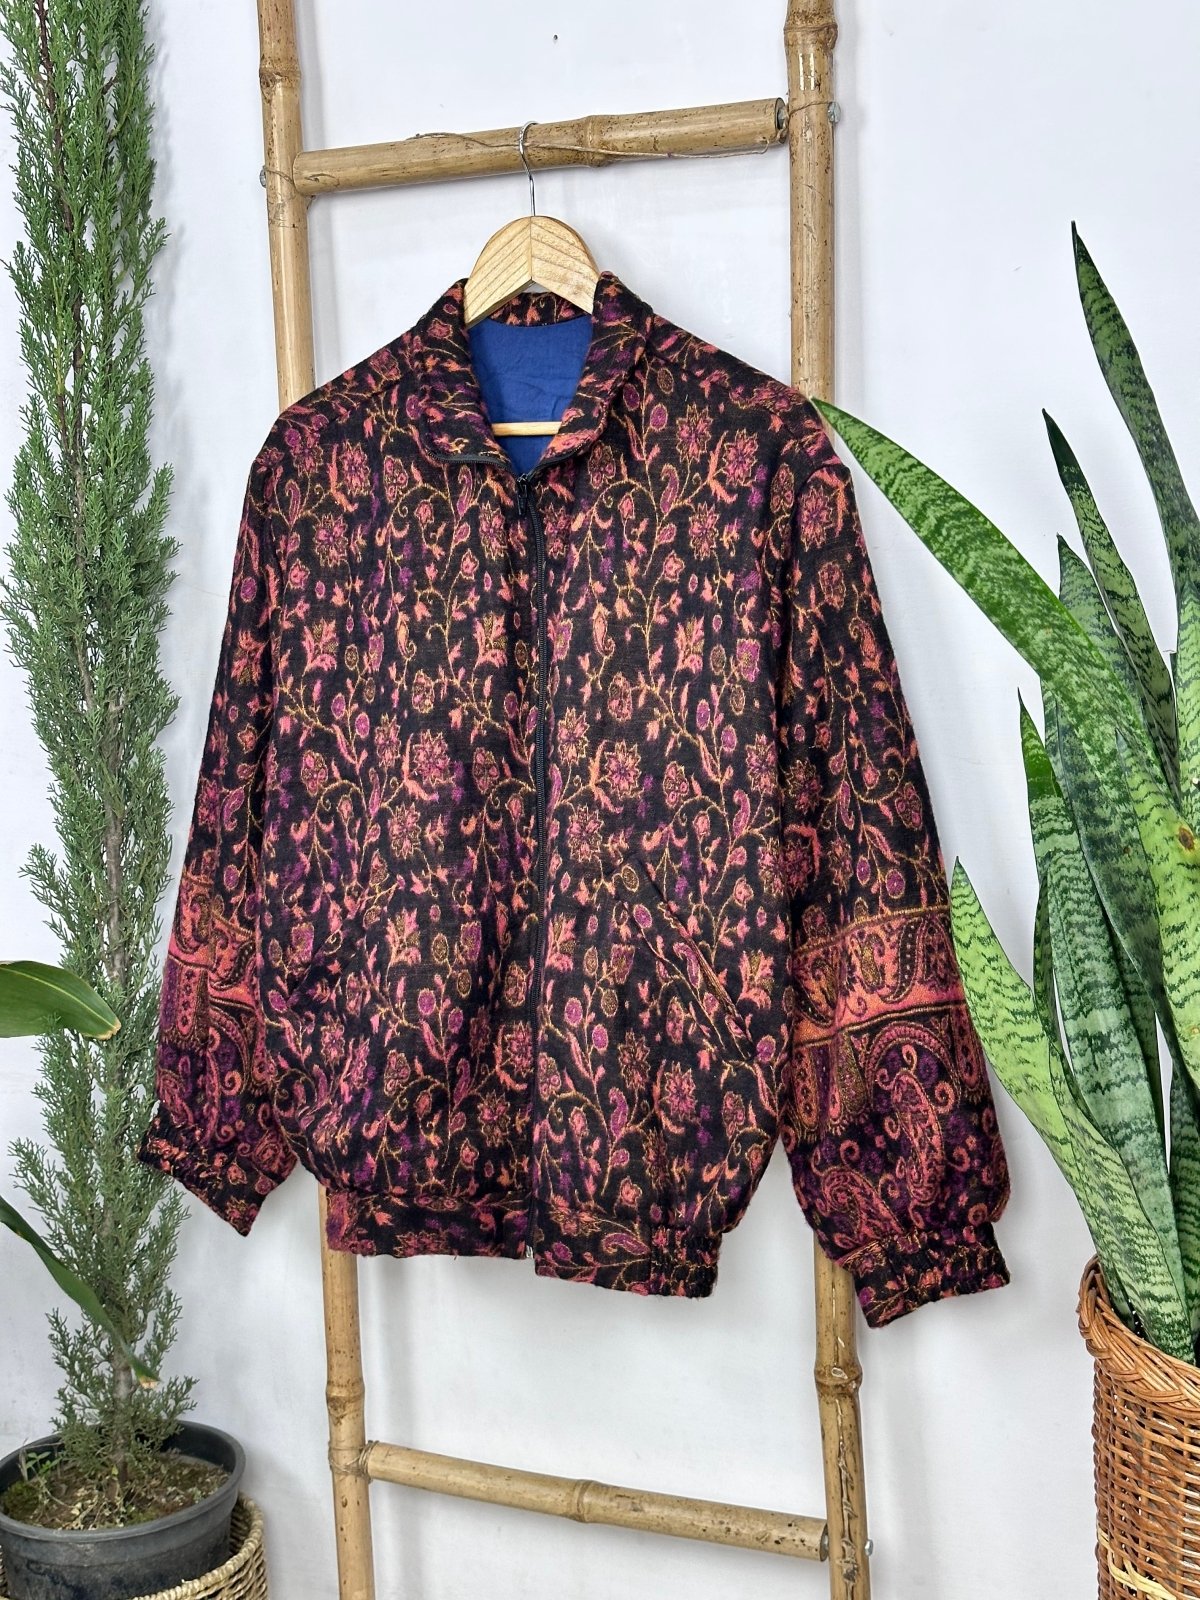 Cozy Yak Wool Blend Bomber Bolero Jacket | Warm Comfy Soft Winter Fashion Casual Party Wear | Boho Chic Paisley Floral Pink Hue Shade Jacket - The Eastern Loom